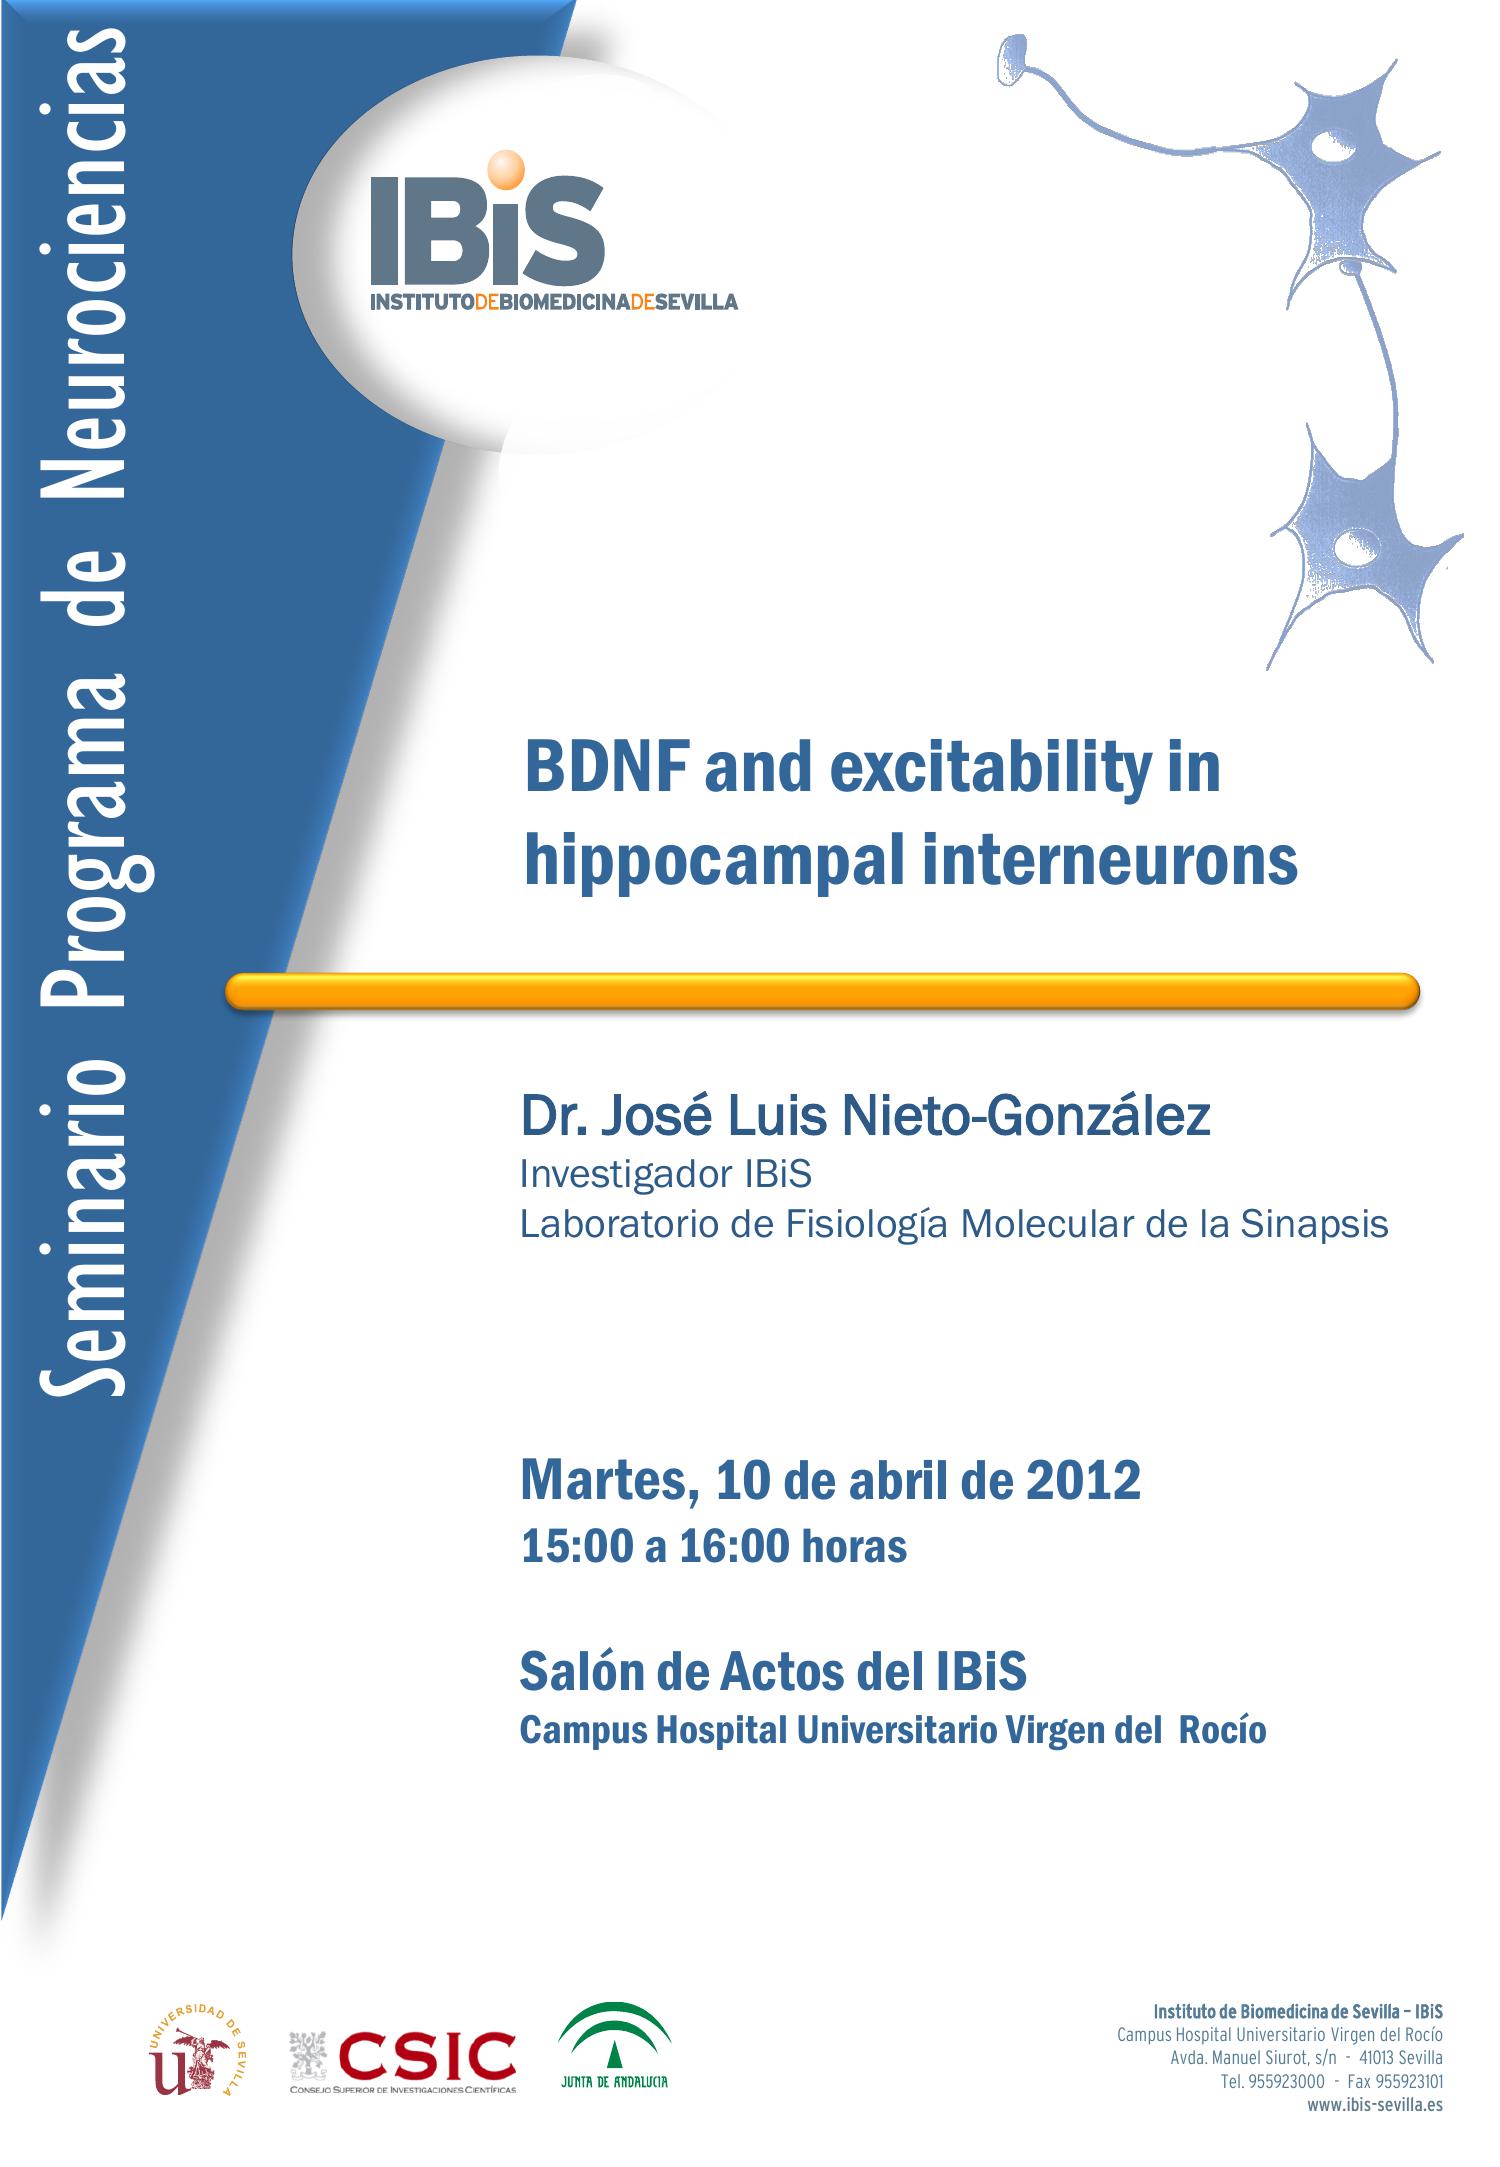 Poster: BDNF and excitability in hippocampal interneurons.